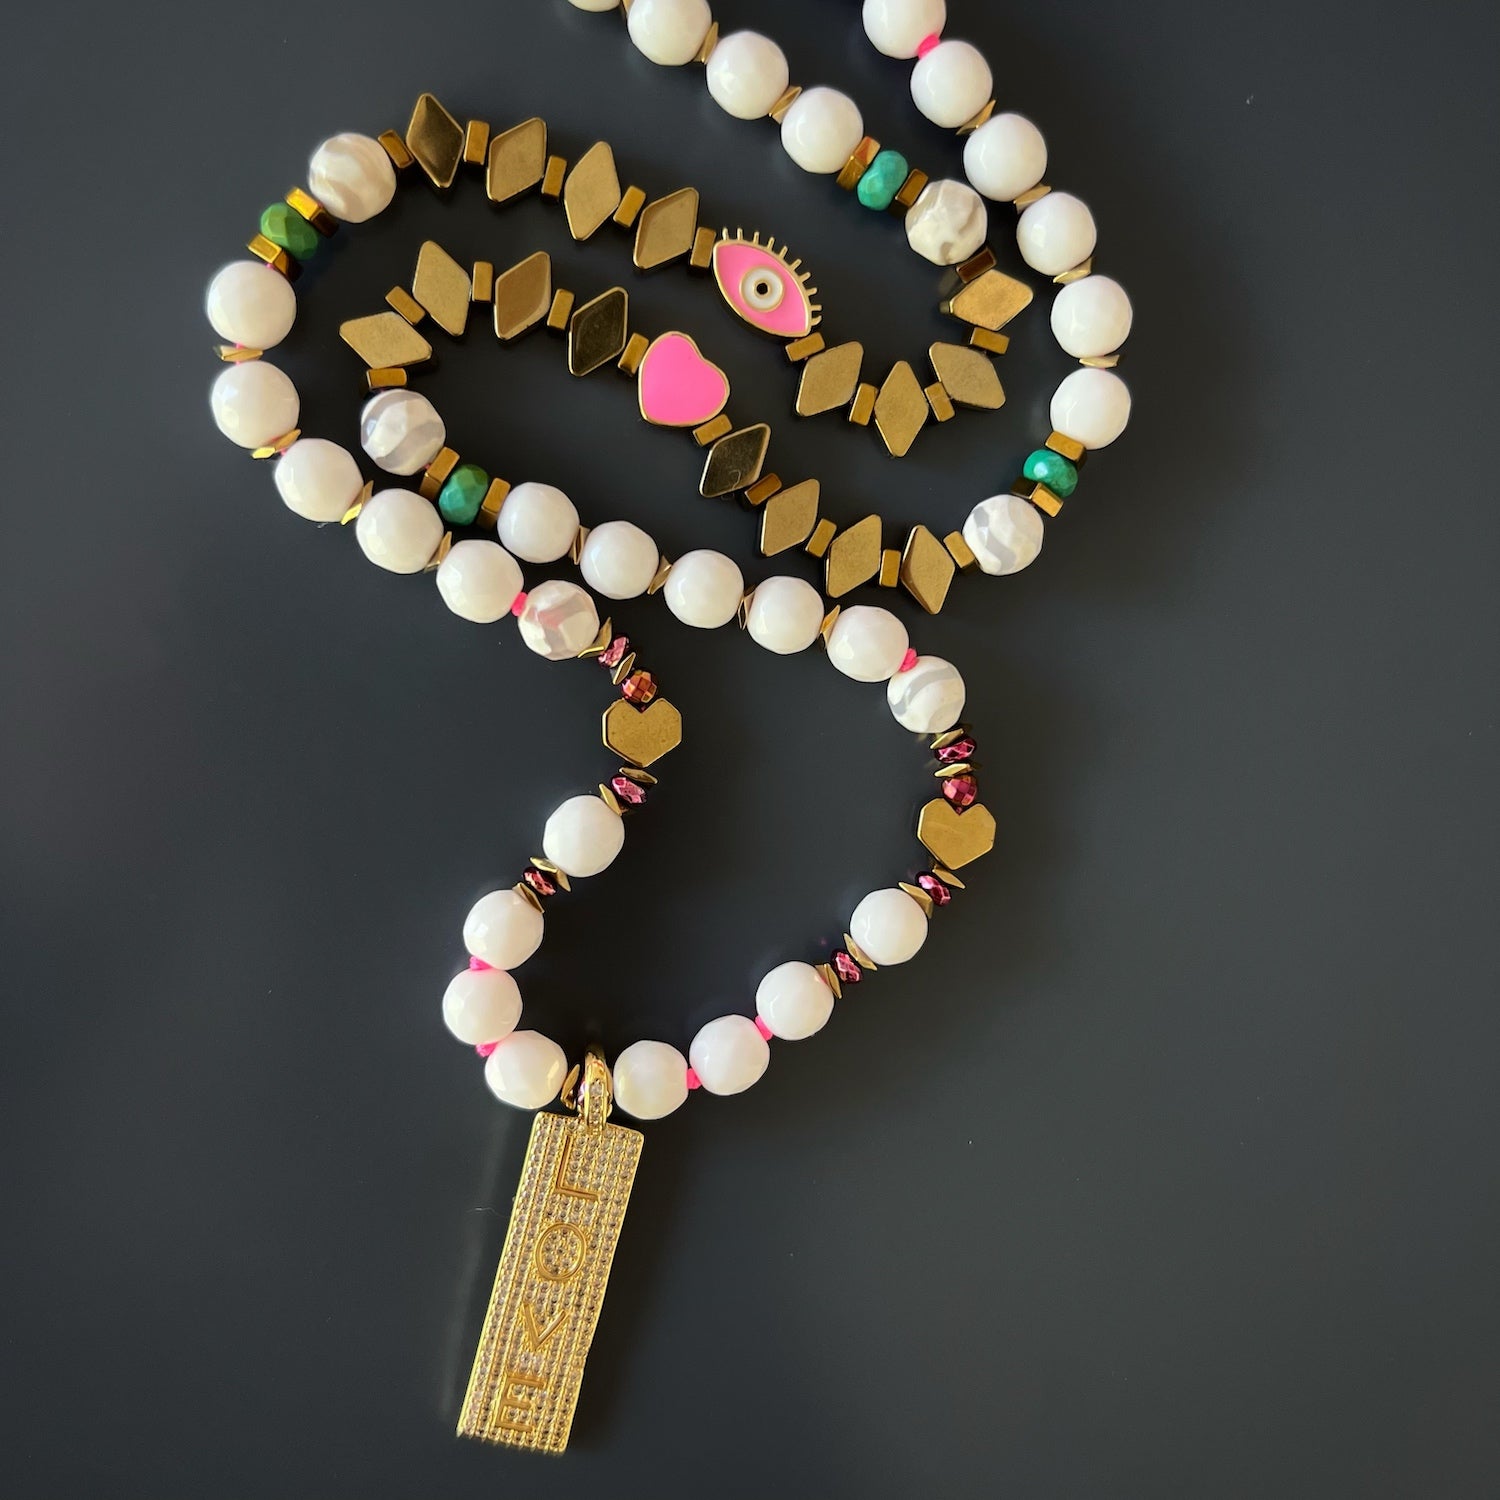 Close-up shot of the Jade beads on the Power Of Love Necklace, symbolizing purity and tranquility.